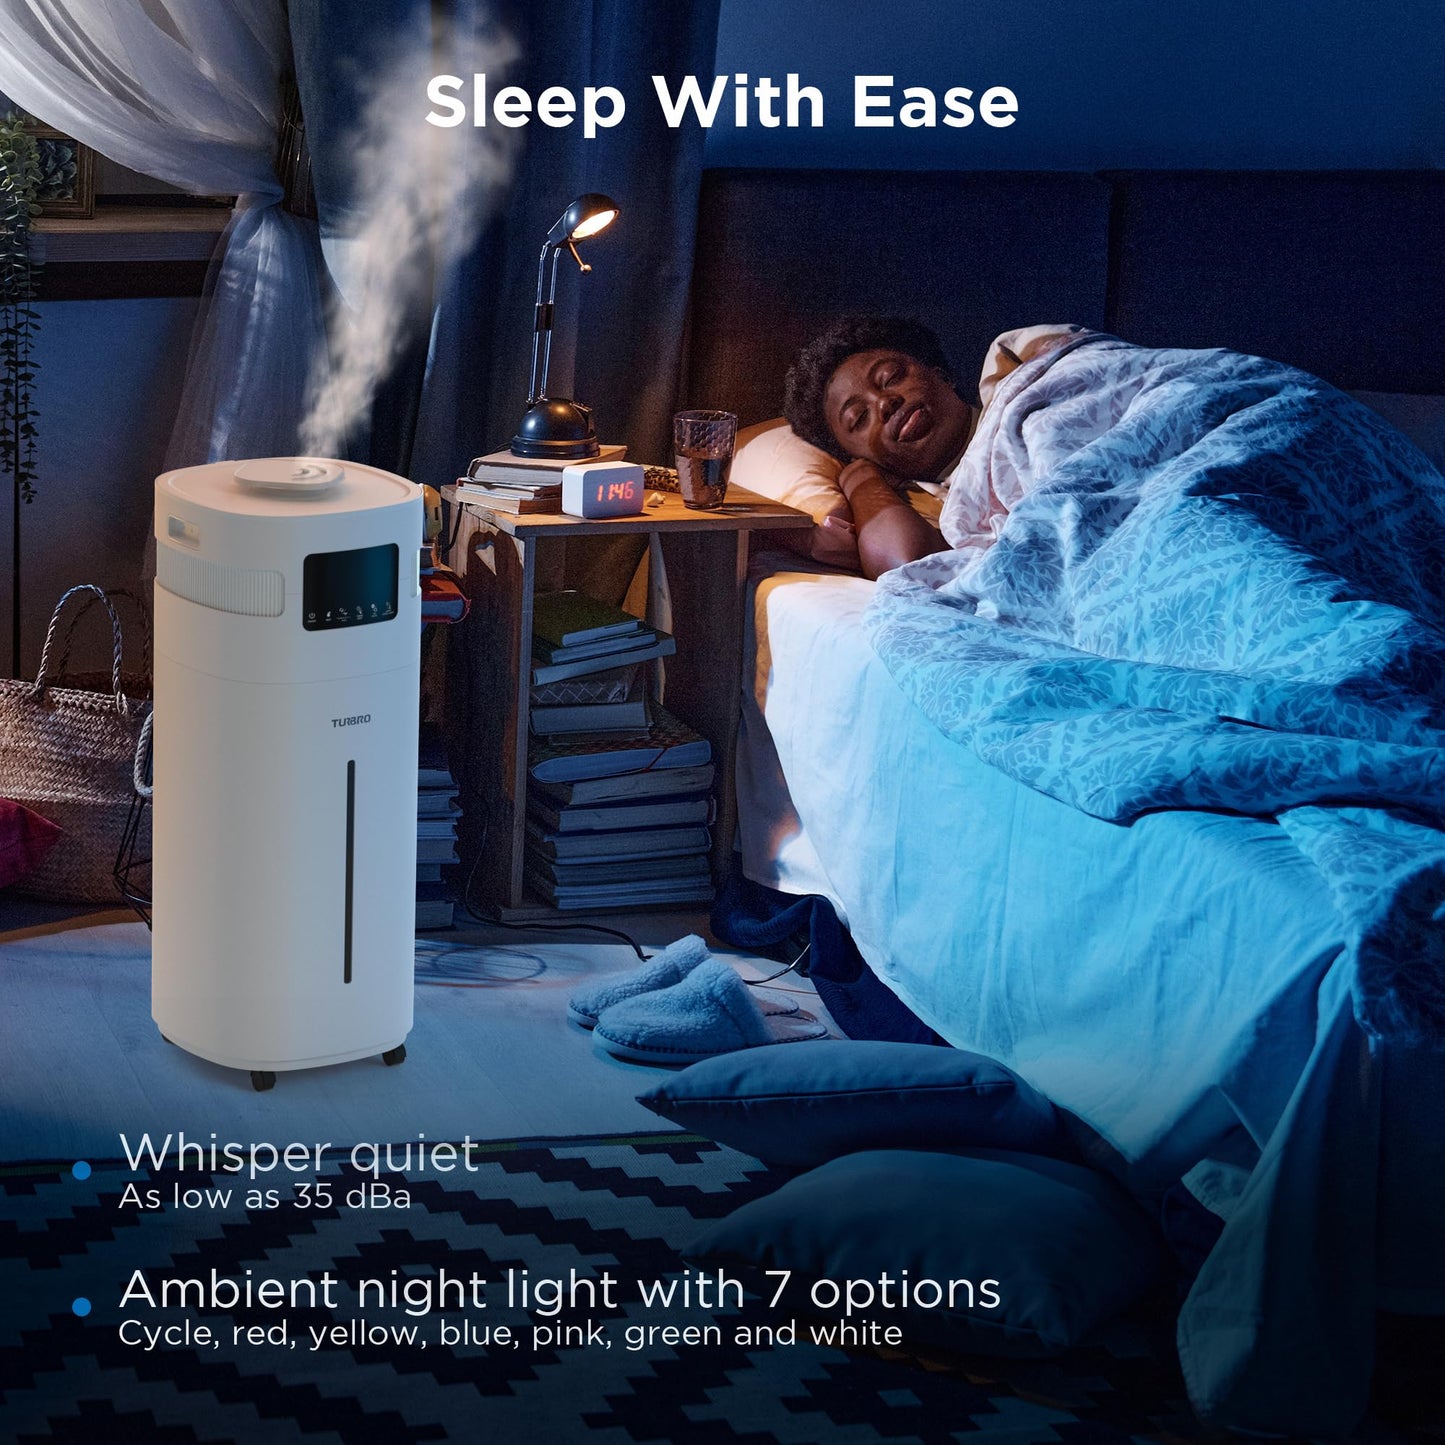 Wi-Fi Enabled Large Humidifier